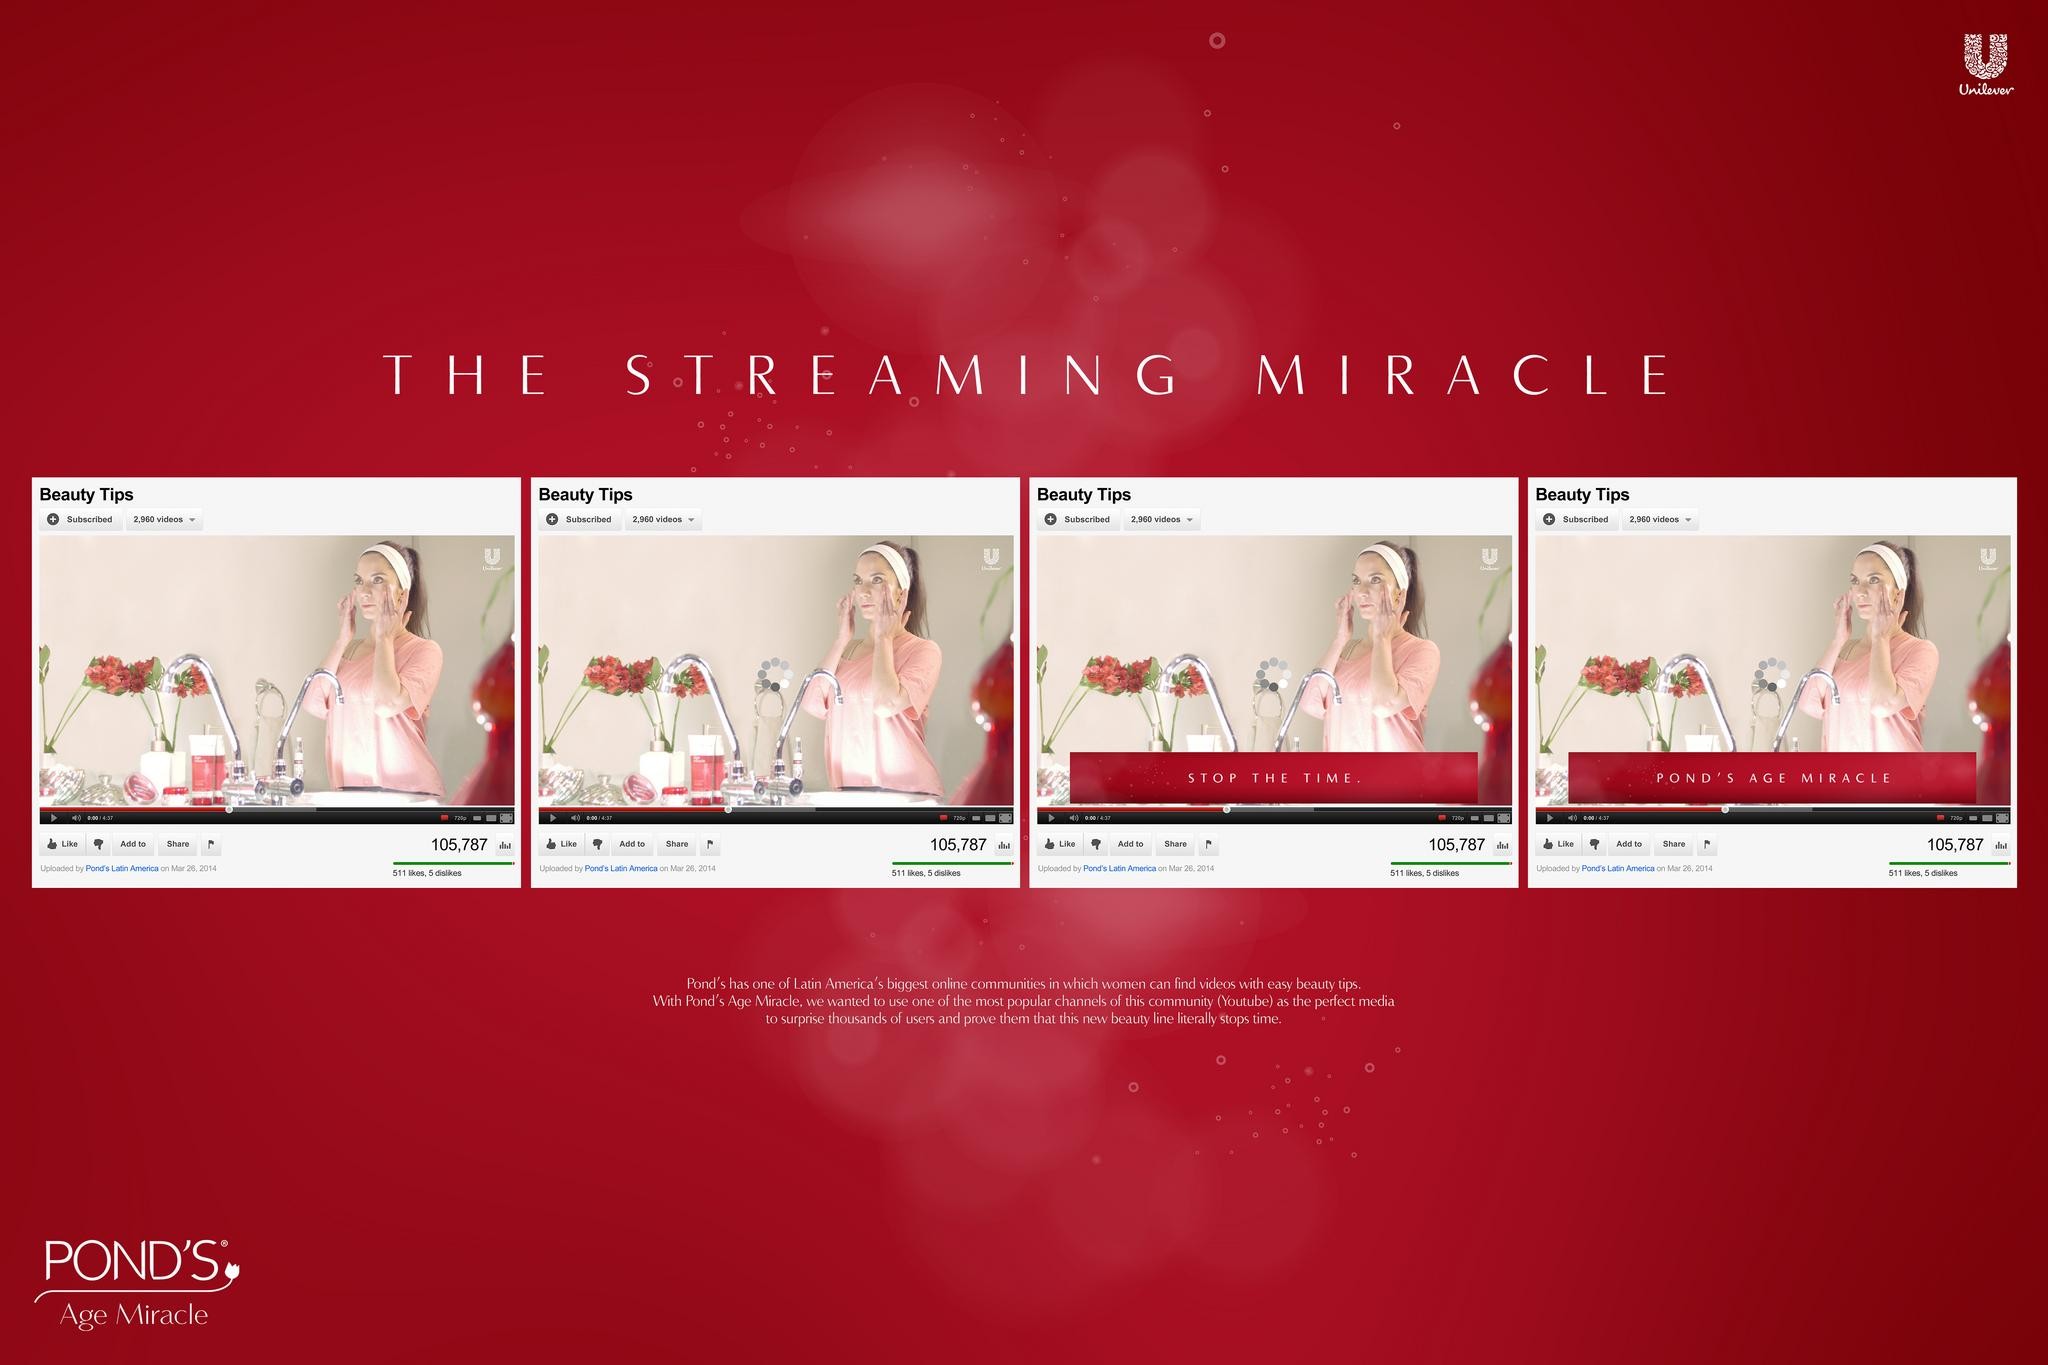 THE STREAMING MIRACLE